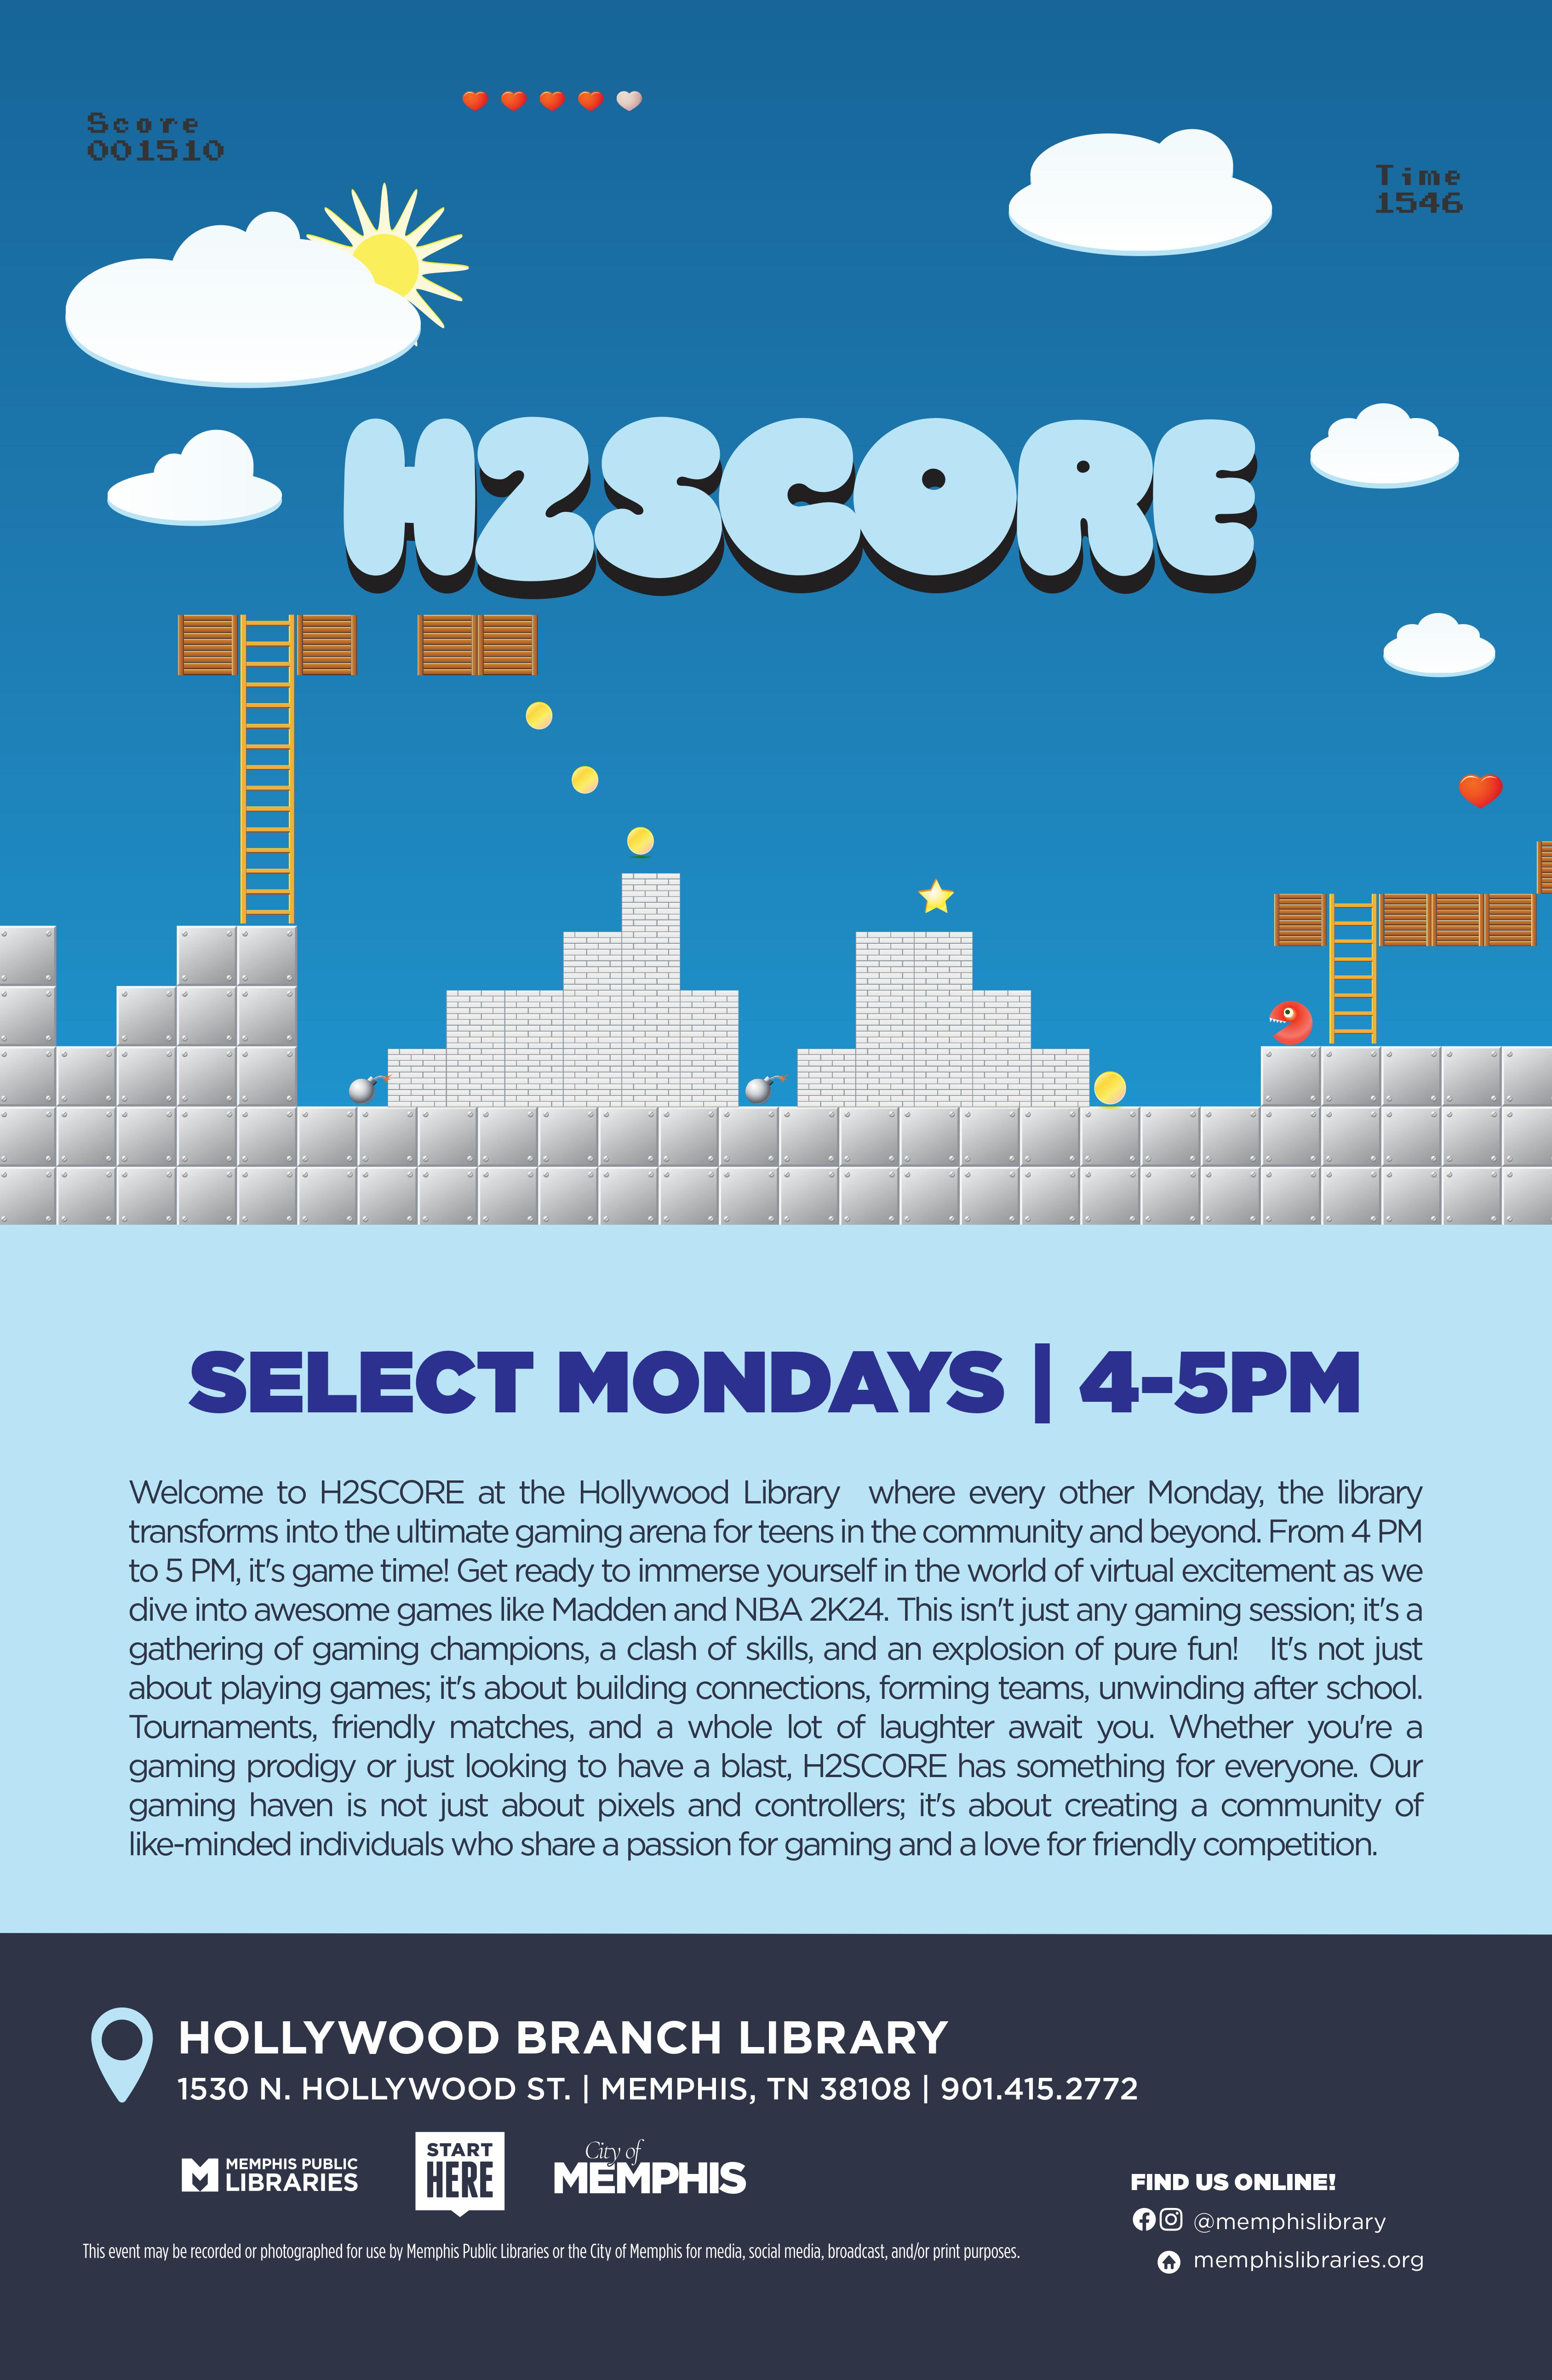 Title: H2SCORE                Description:Step into the thrilling world of H2SCORE at the Hollywood Library, where every other Monday, the library transforms into a vibrant gaming hub for teens both local and beyond. From 4 PM to 5 PM, it's time to embark on a virtual adventure filled with excitement as we delve into popular games like Madden and NBA 2K24. This isn't merely a gaming session; it's a gathering of skilled players, a clash of talents, and an explosion of pure enjoyment! It's more than just play